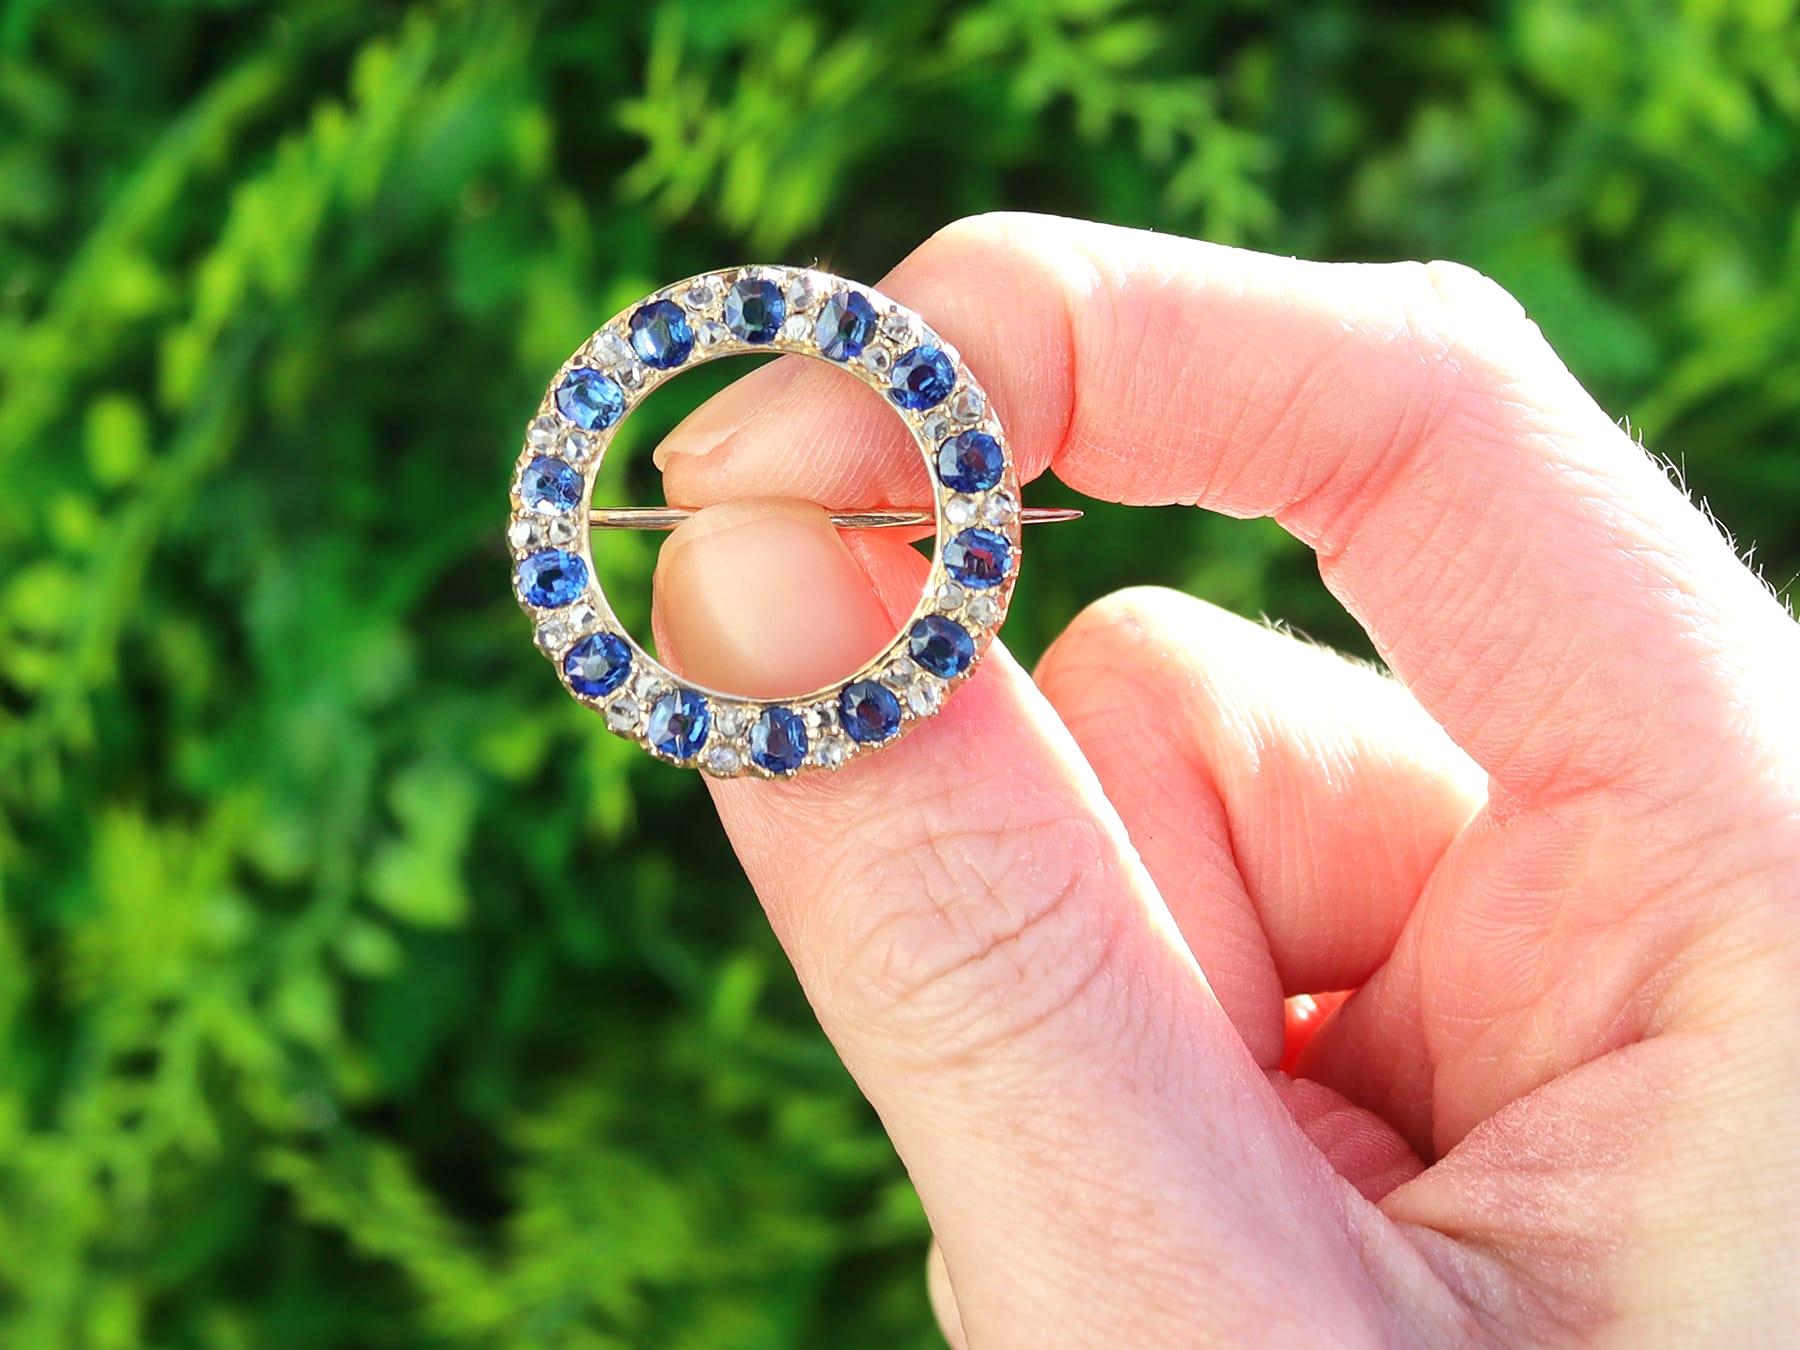 A stunning, fine and impressive antique Victorian 0.60 carat diamond and 3.36 carat sapphire, 15 karat yellow gold circular brooch; part of our diverse Victorian jewellery collections

This stunning, fine and impressive antique sapphire brooch has